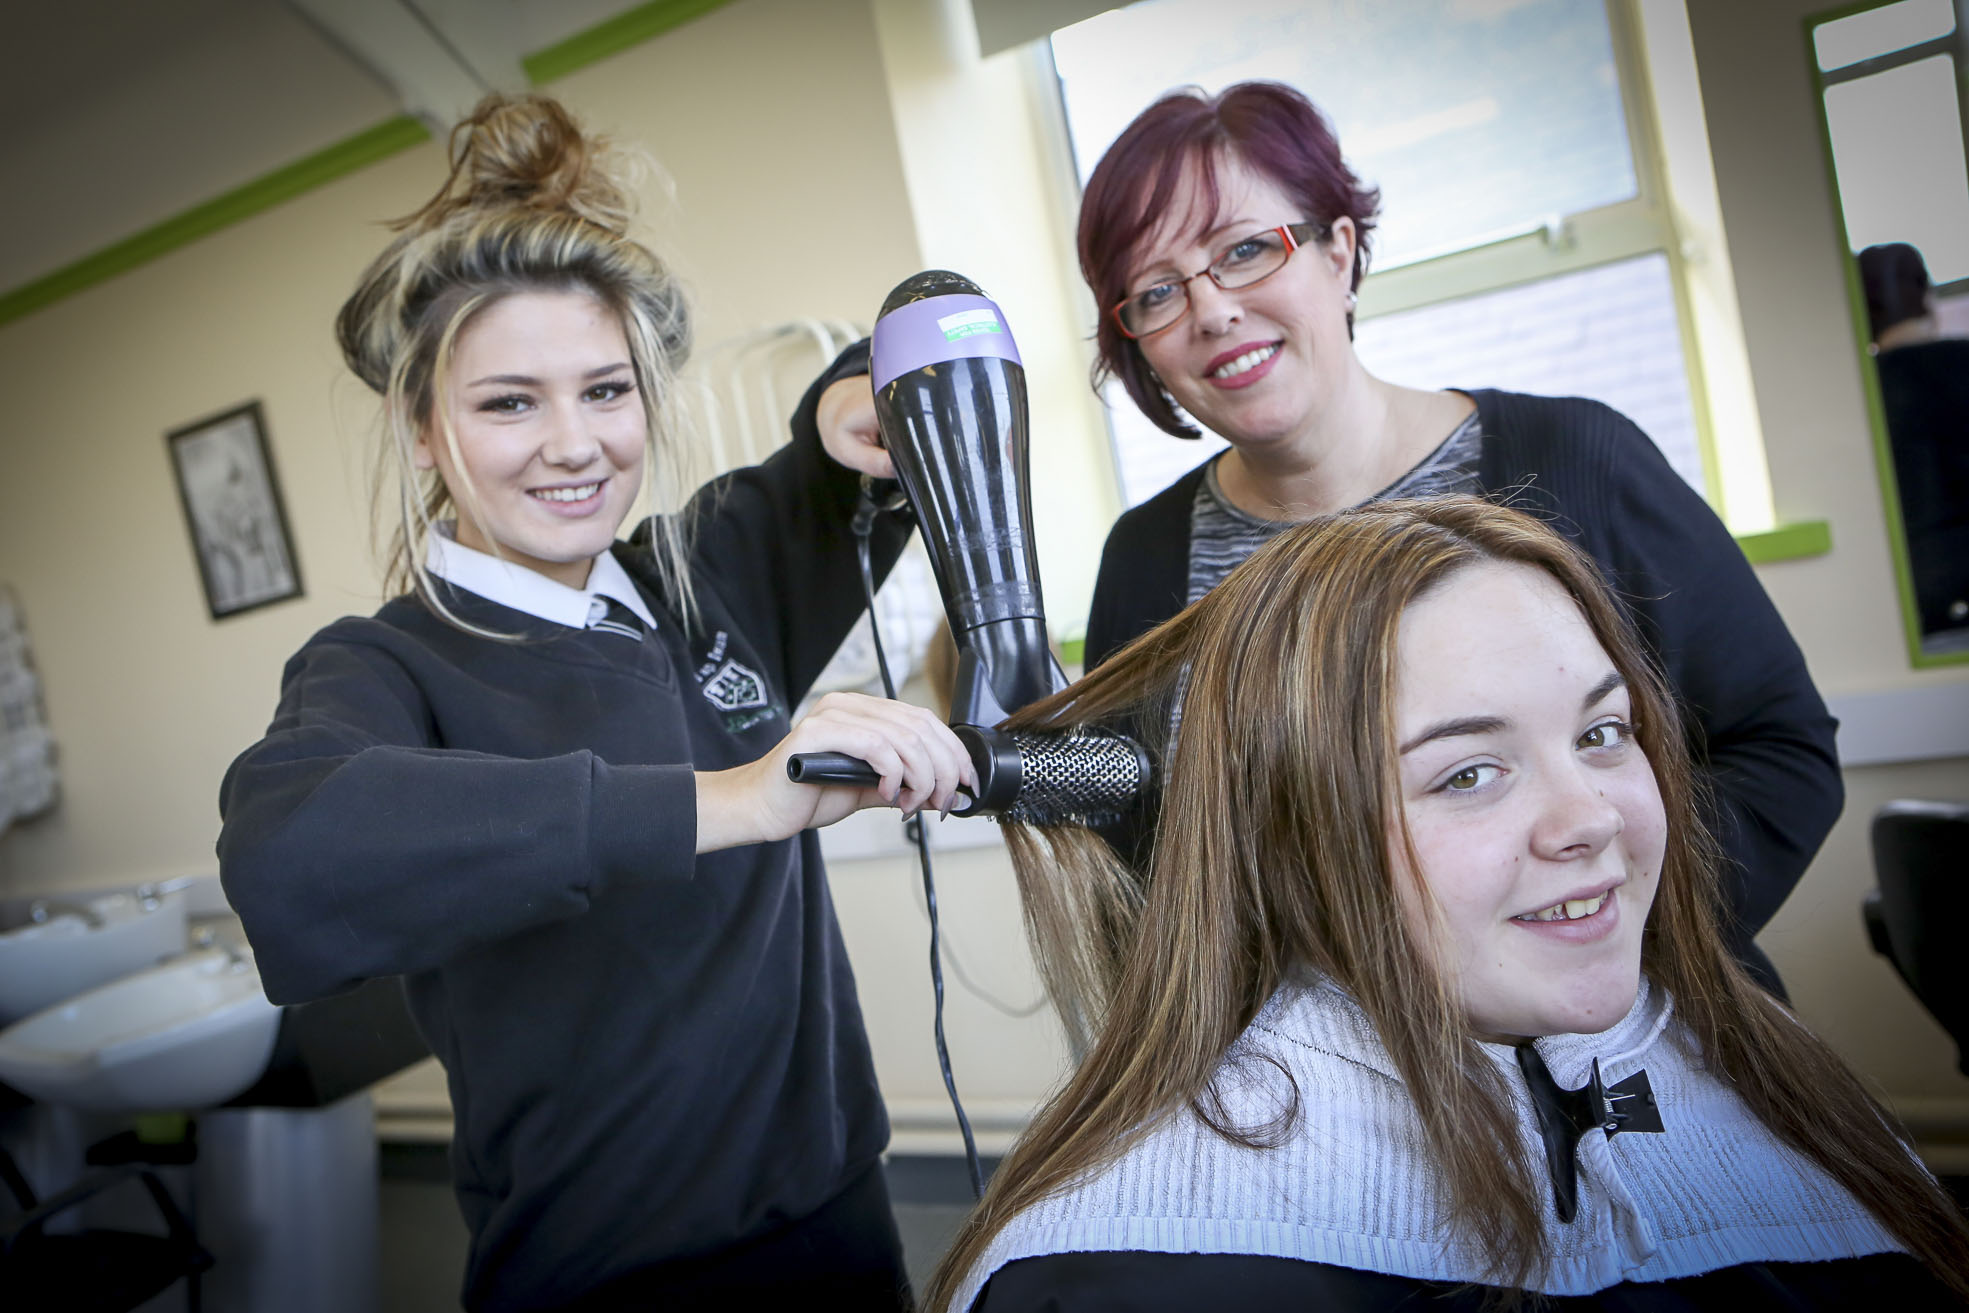 Abergele school a cut above the rest with hair and beauty salon